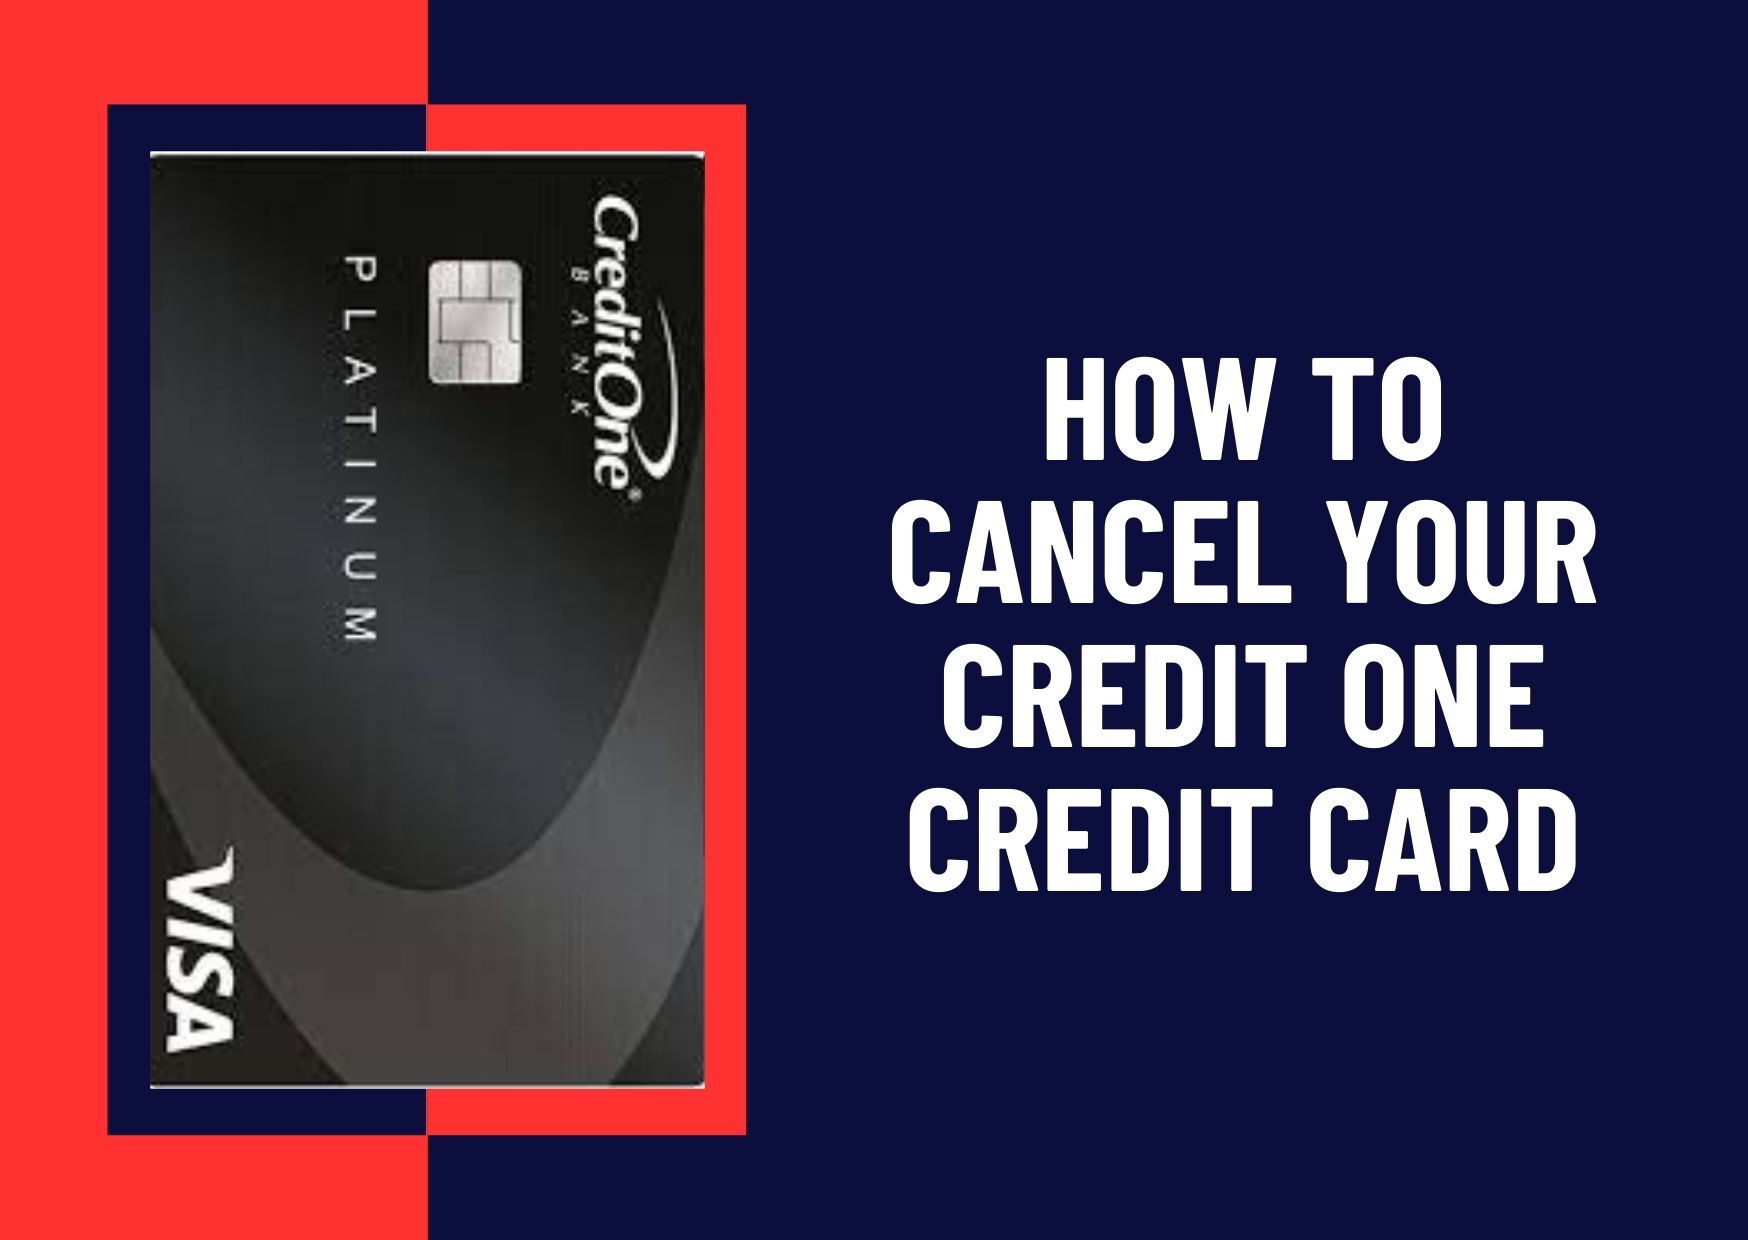 How to Cancel Your Credit One Credit Card